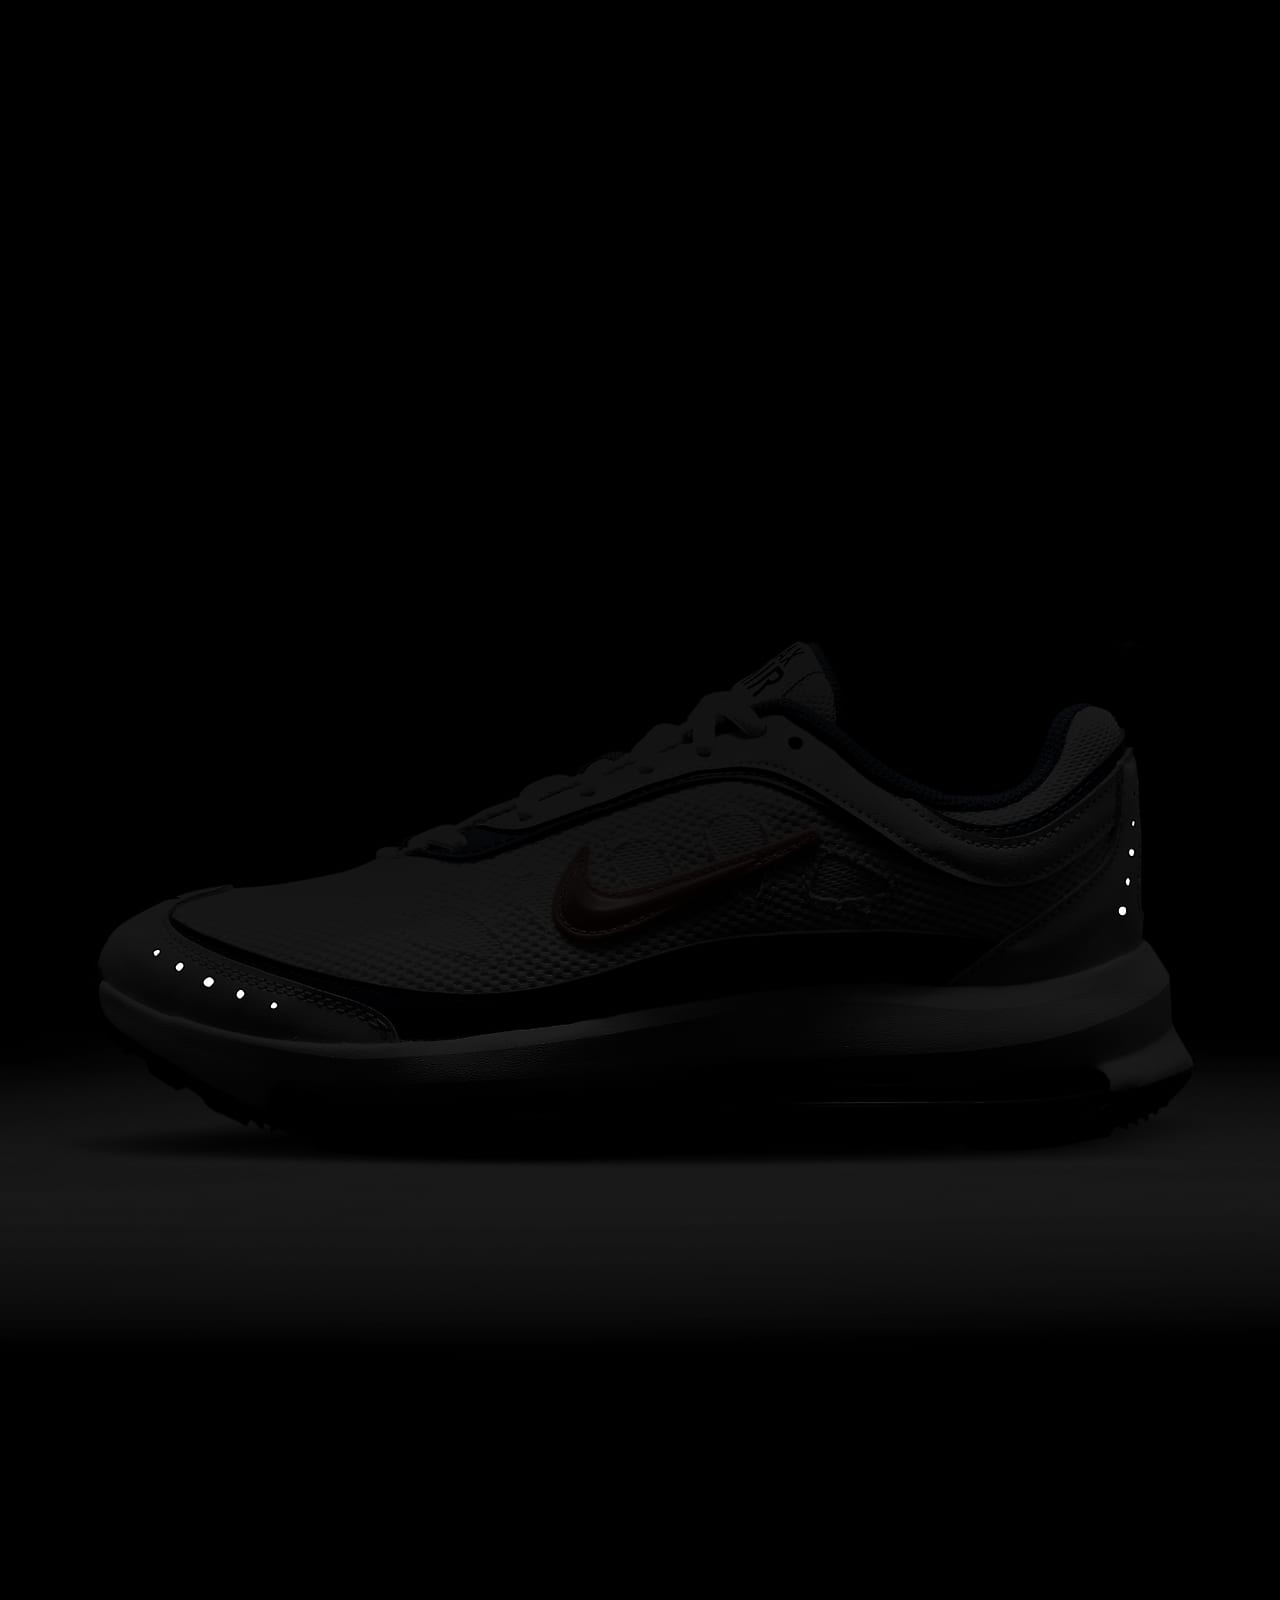 nike air max prices in south africa,www.syncro-system.bg